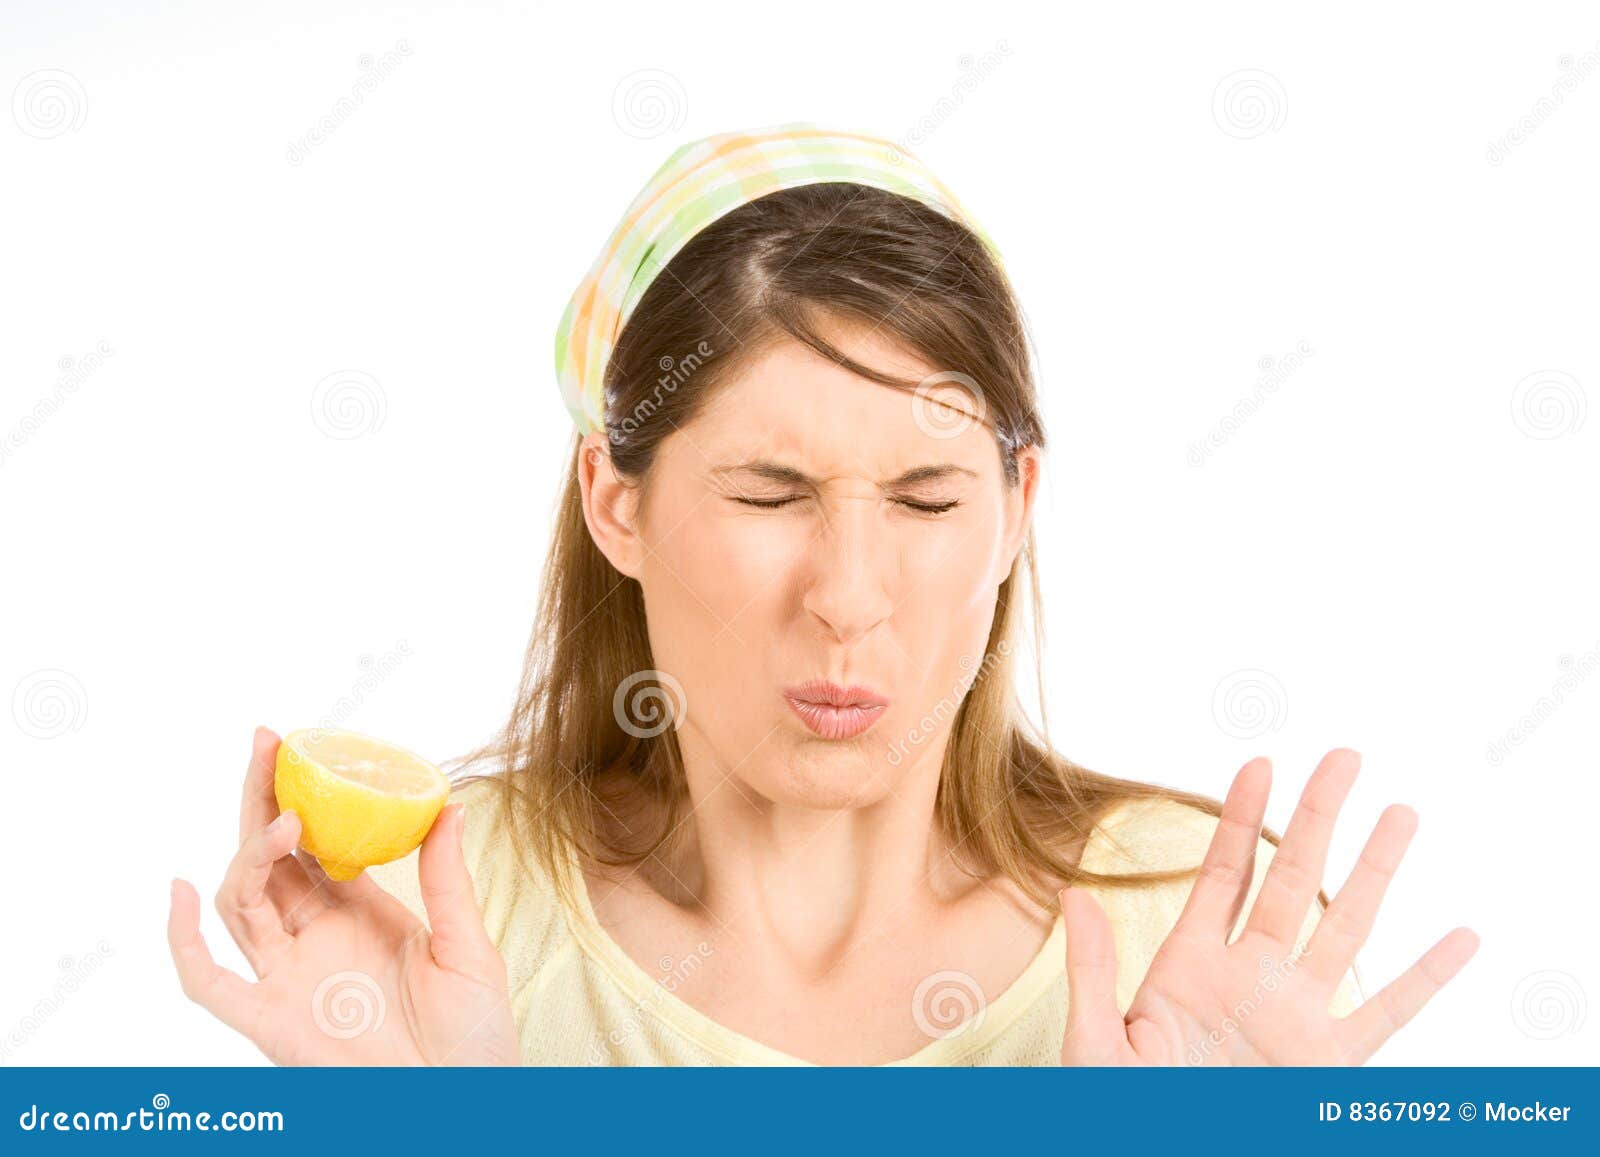 young woman sour grimace with half of lemon